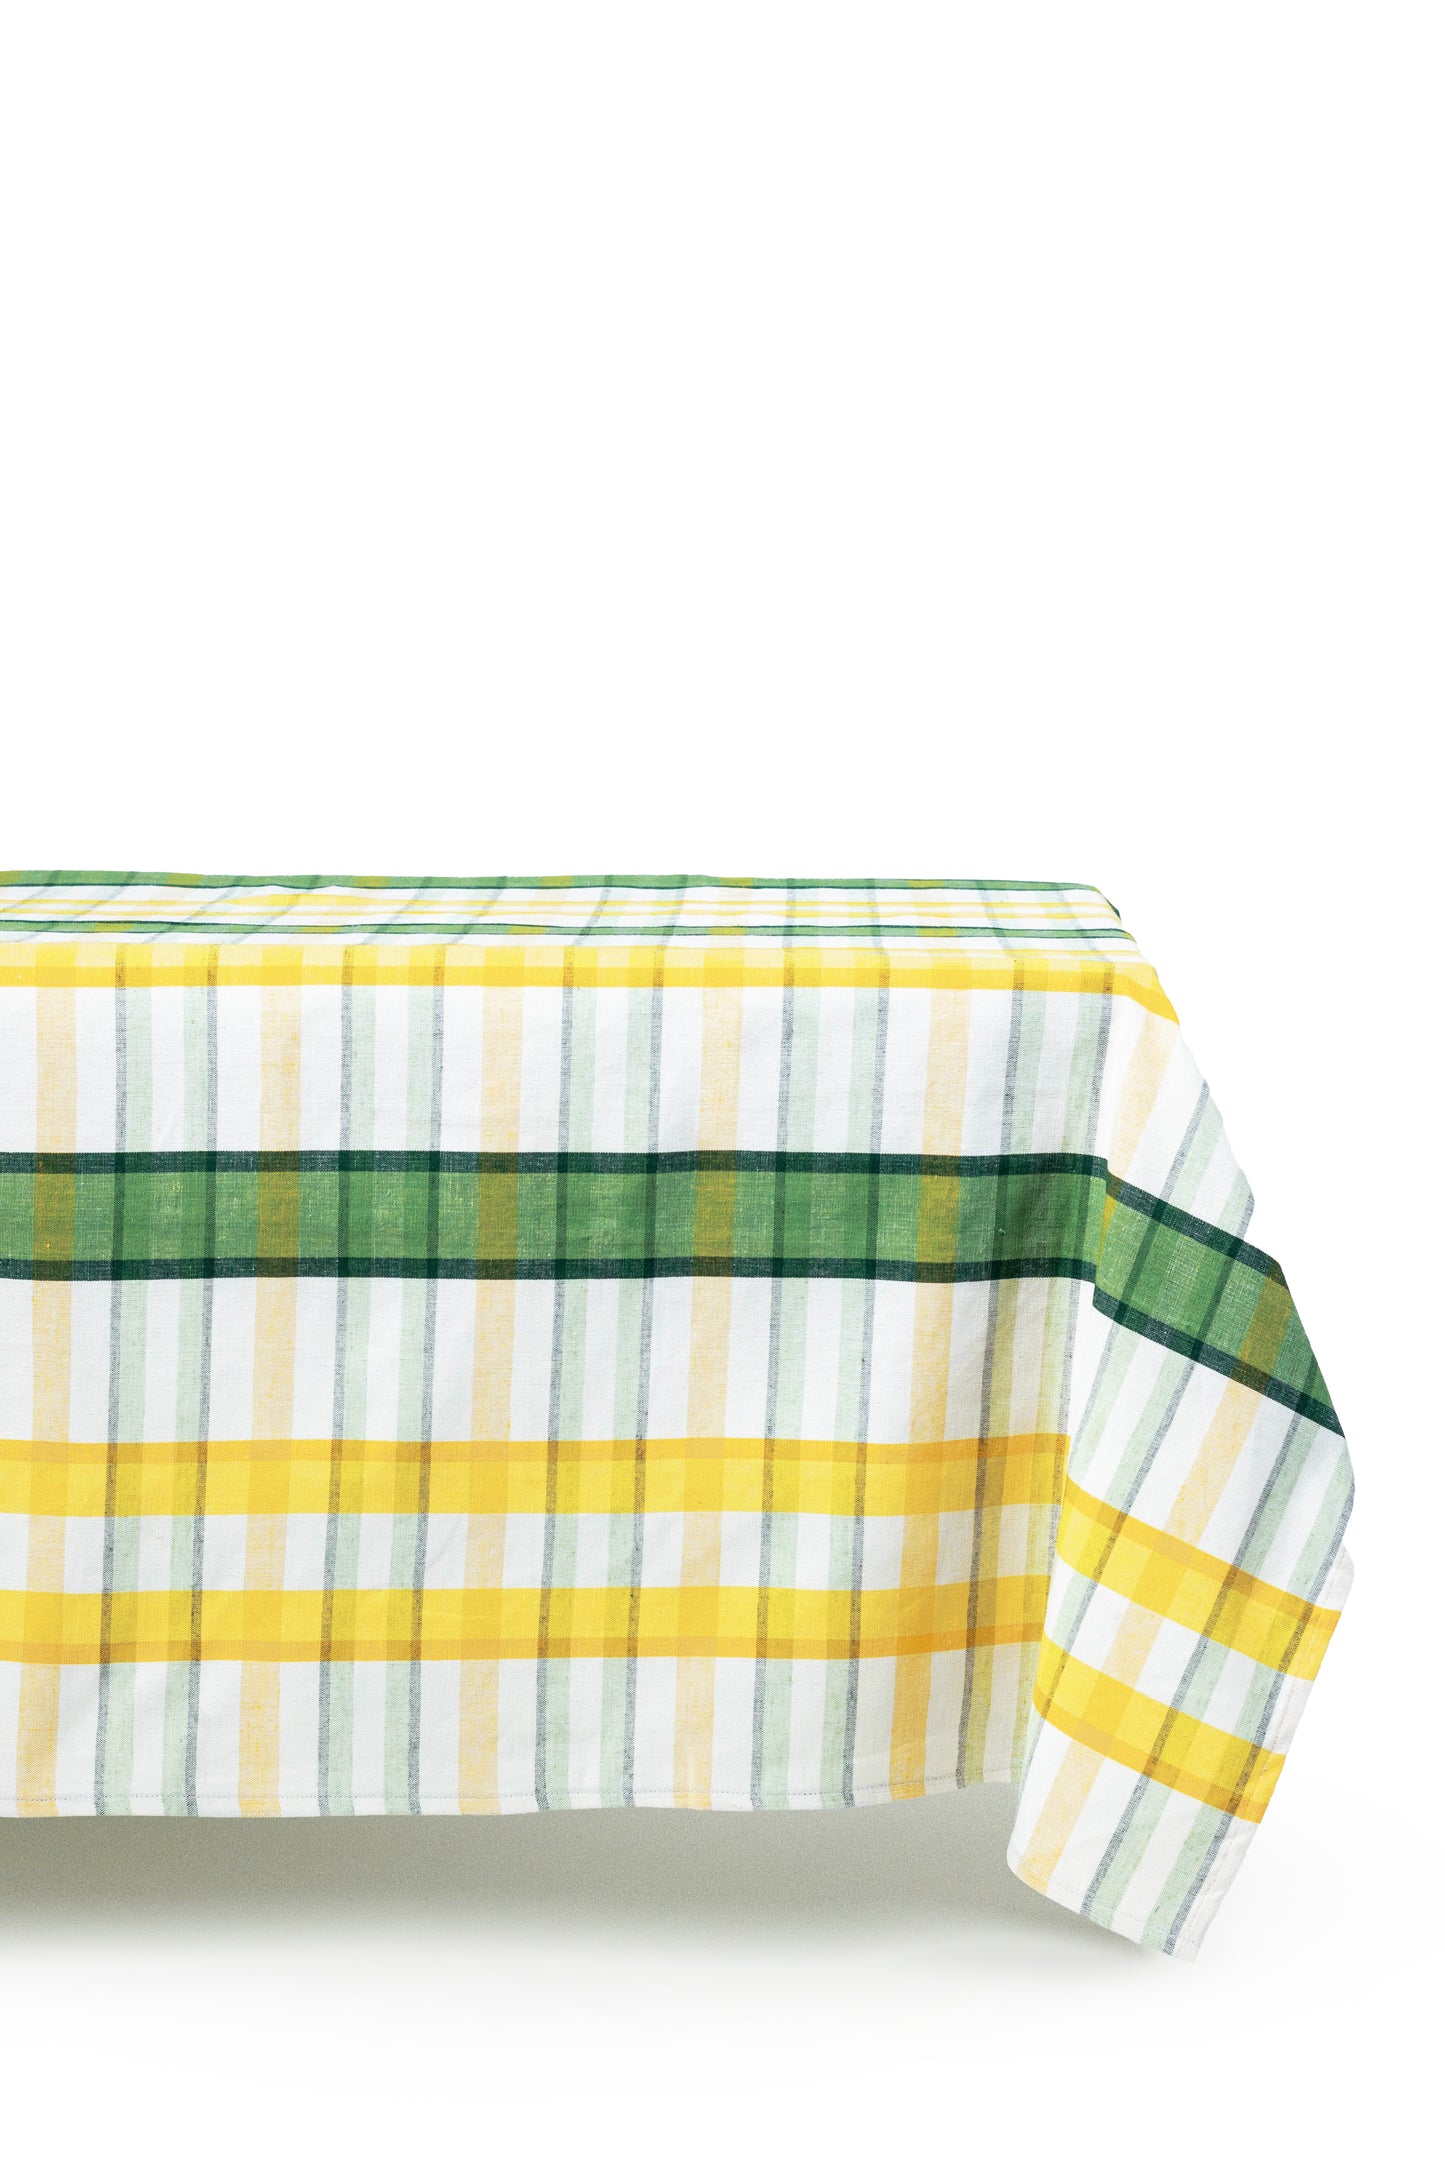 Multicolor Plaid Rectangular Tablecloth for 6